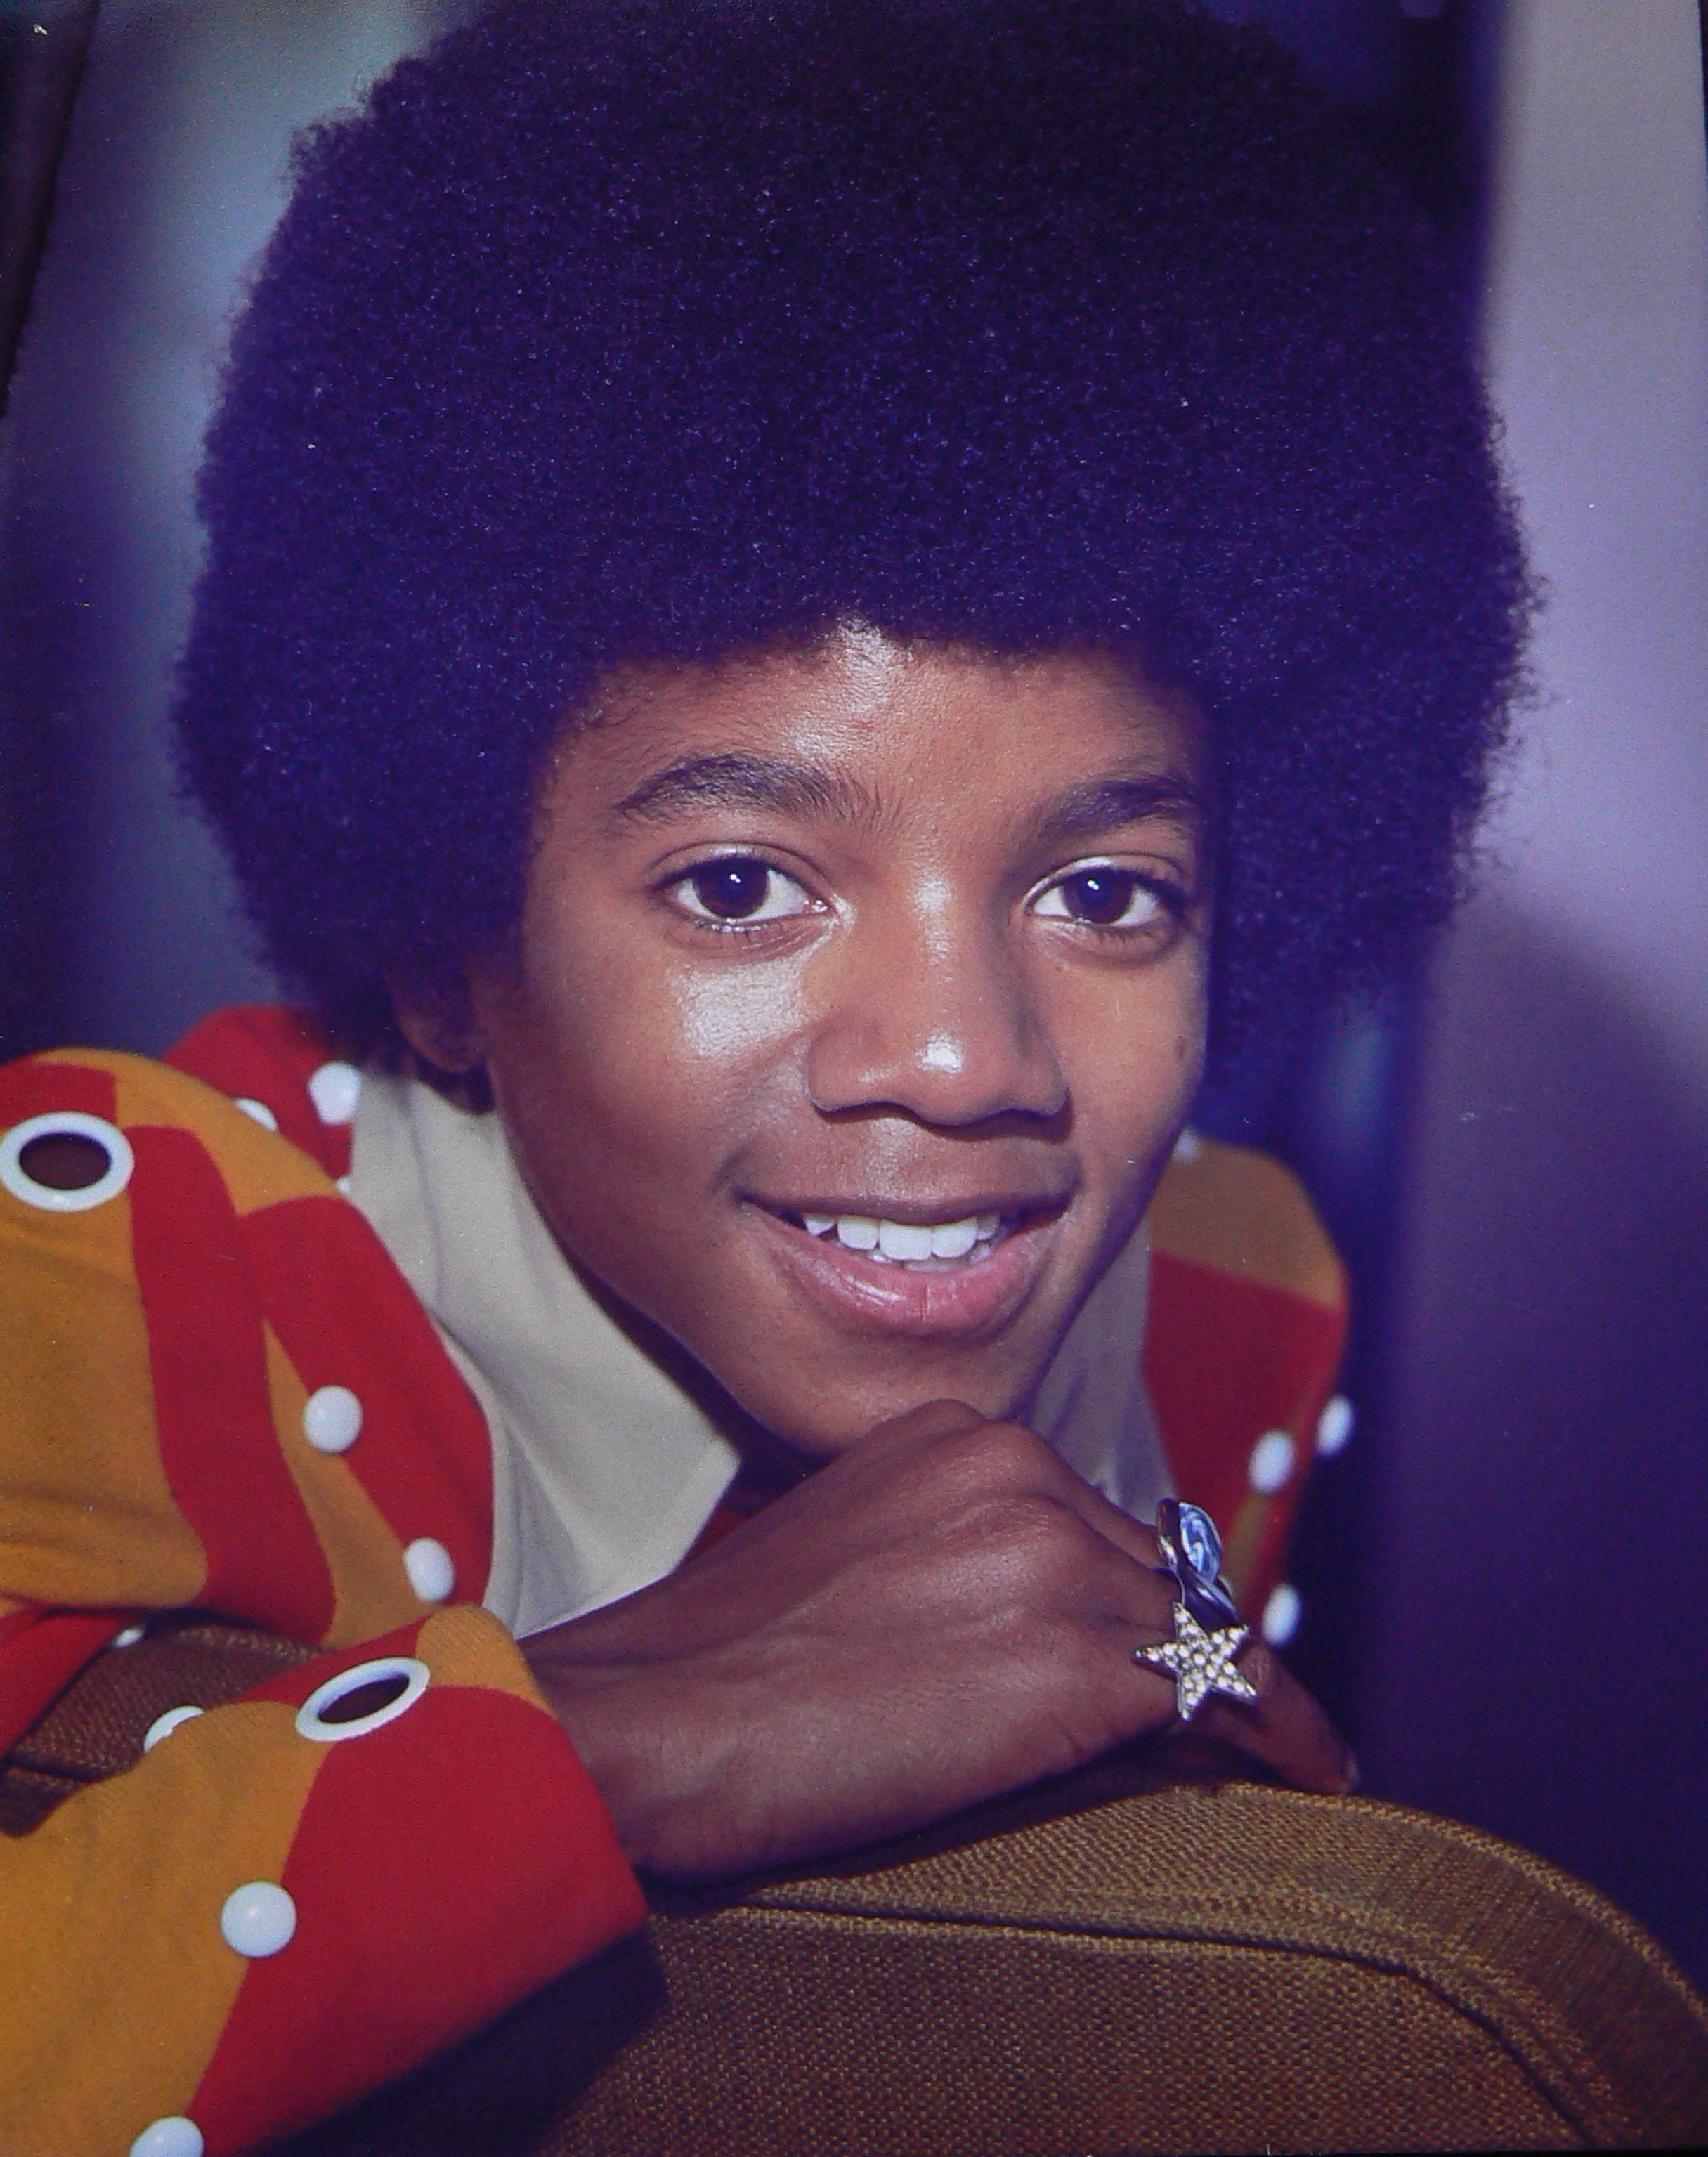 How Michael Jackson Would Look without Plastic Surgery before His Passing  At 50: Photo via AI